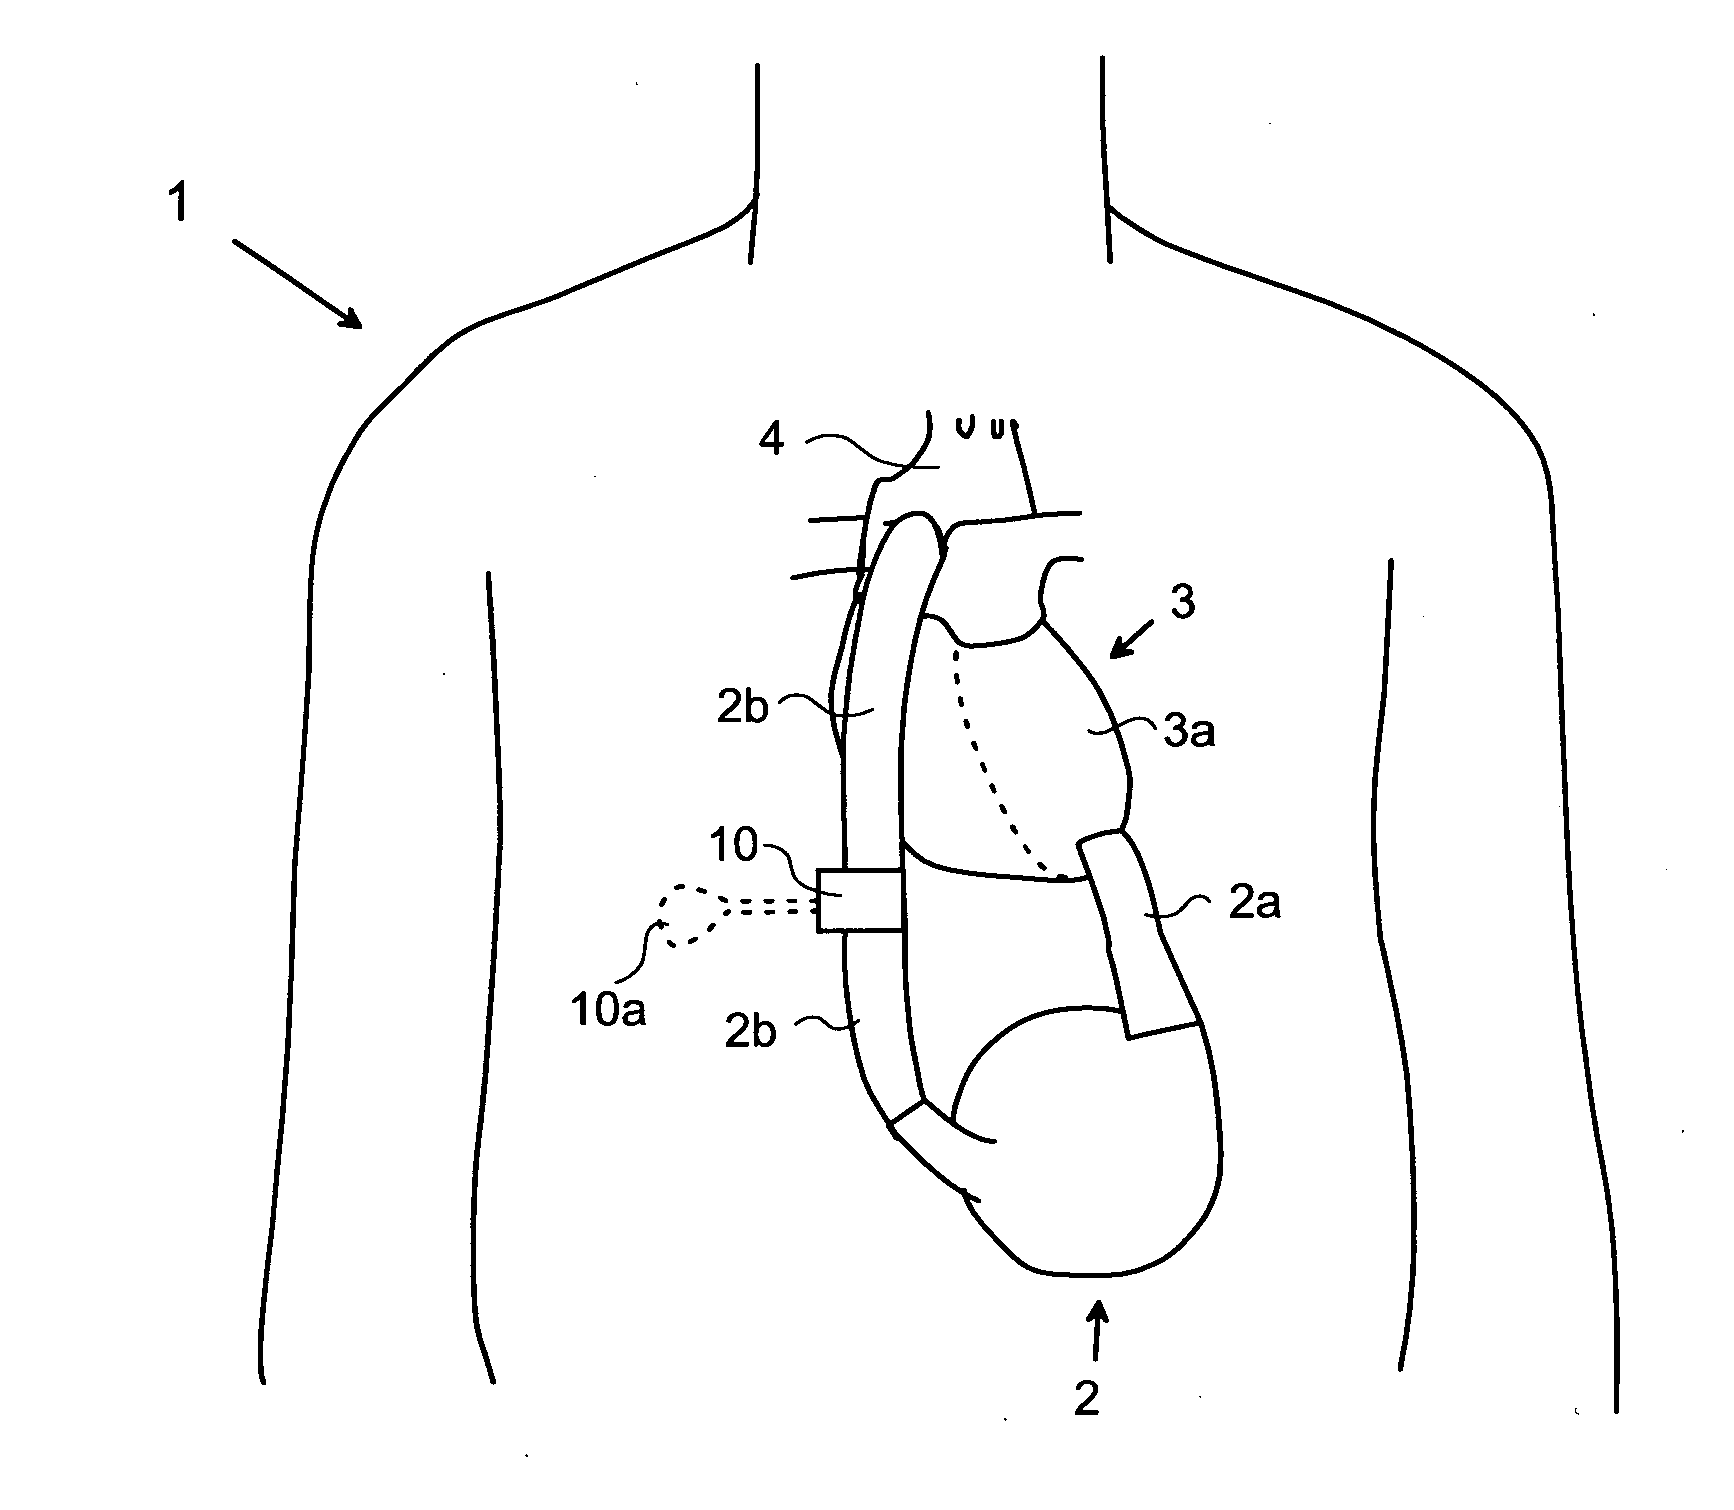 Blood clot removal device, system, and method